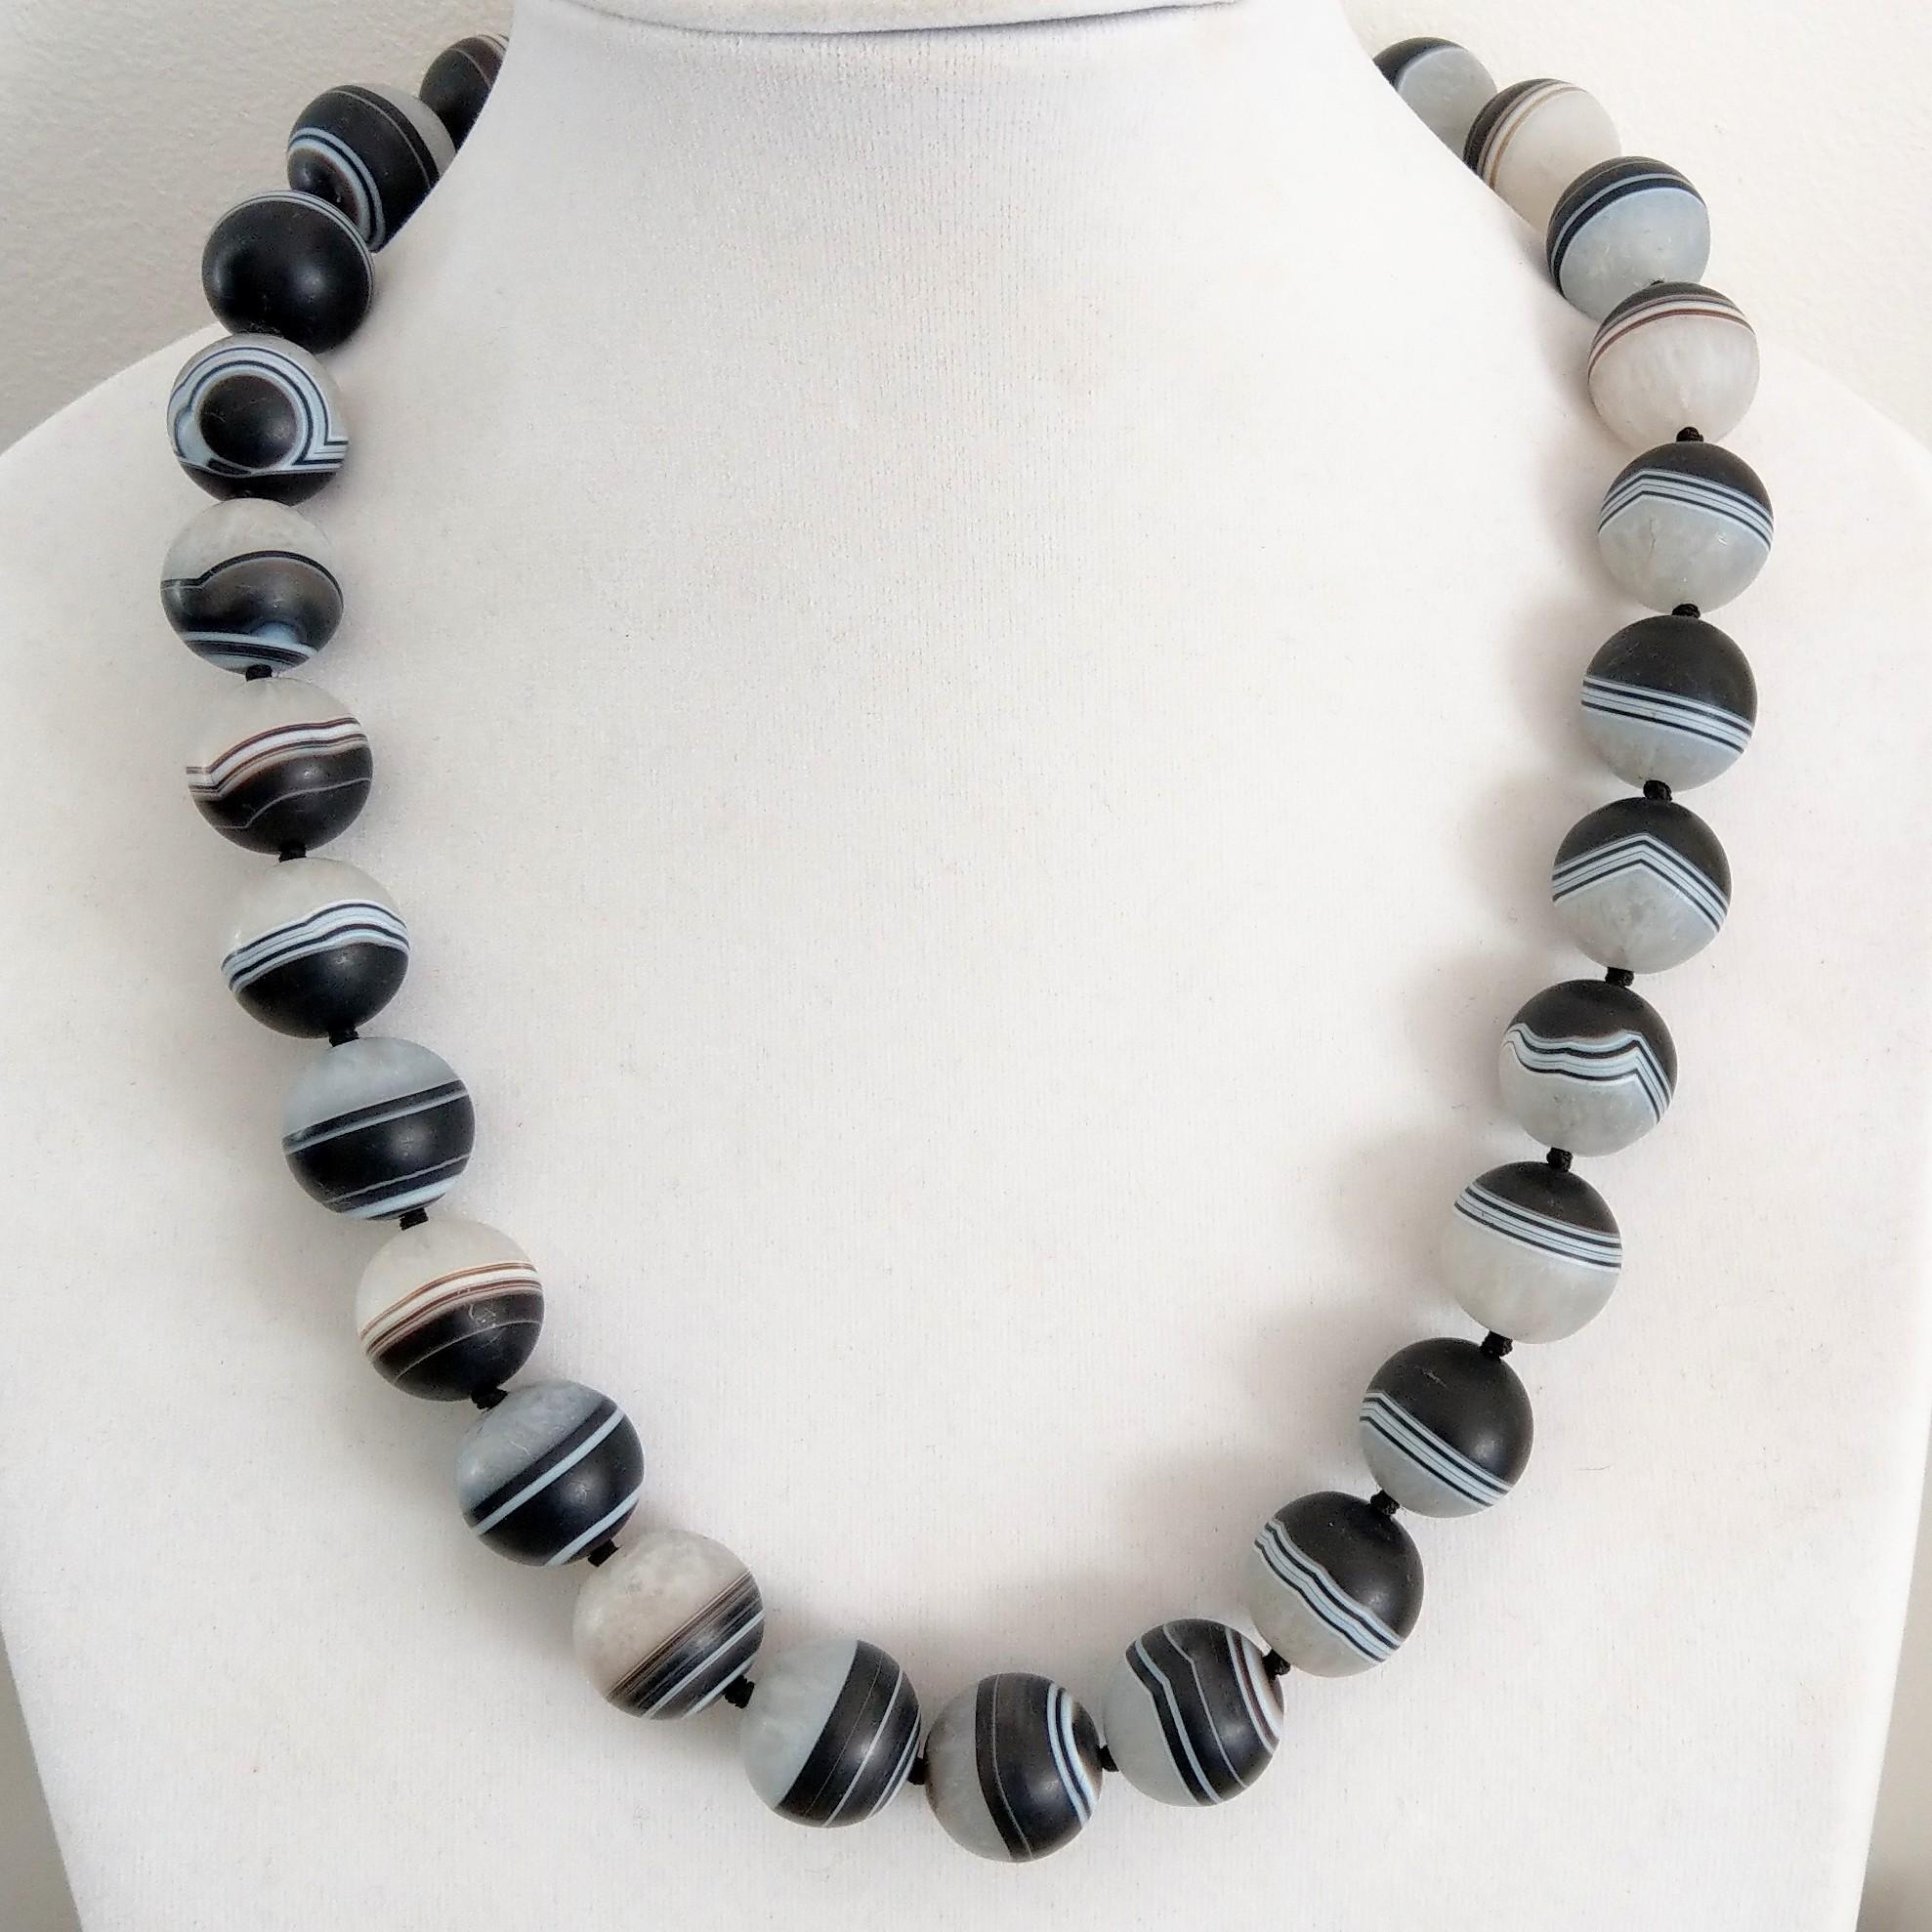 Stunning 18mm matt natural banded agate hand knotted on black thread with a large 55mm Sterling silver hook clasp


Finished necklace measures 57cm
